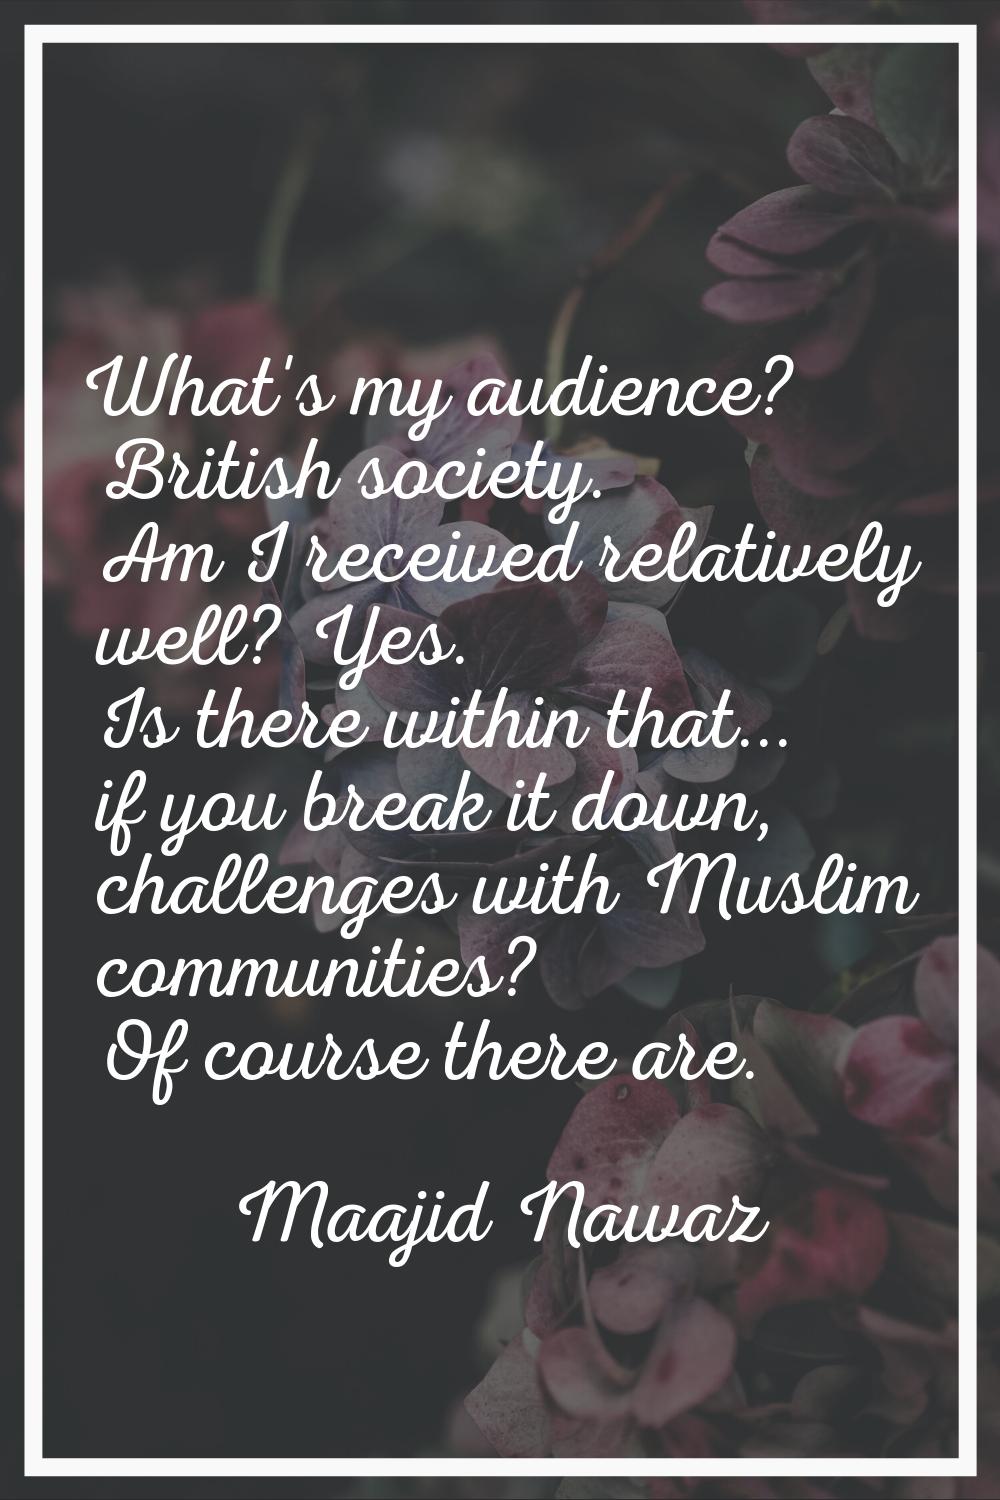 What's my audience? British society. Am I received relatively well? Yes. Is there within that... if